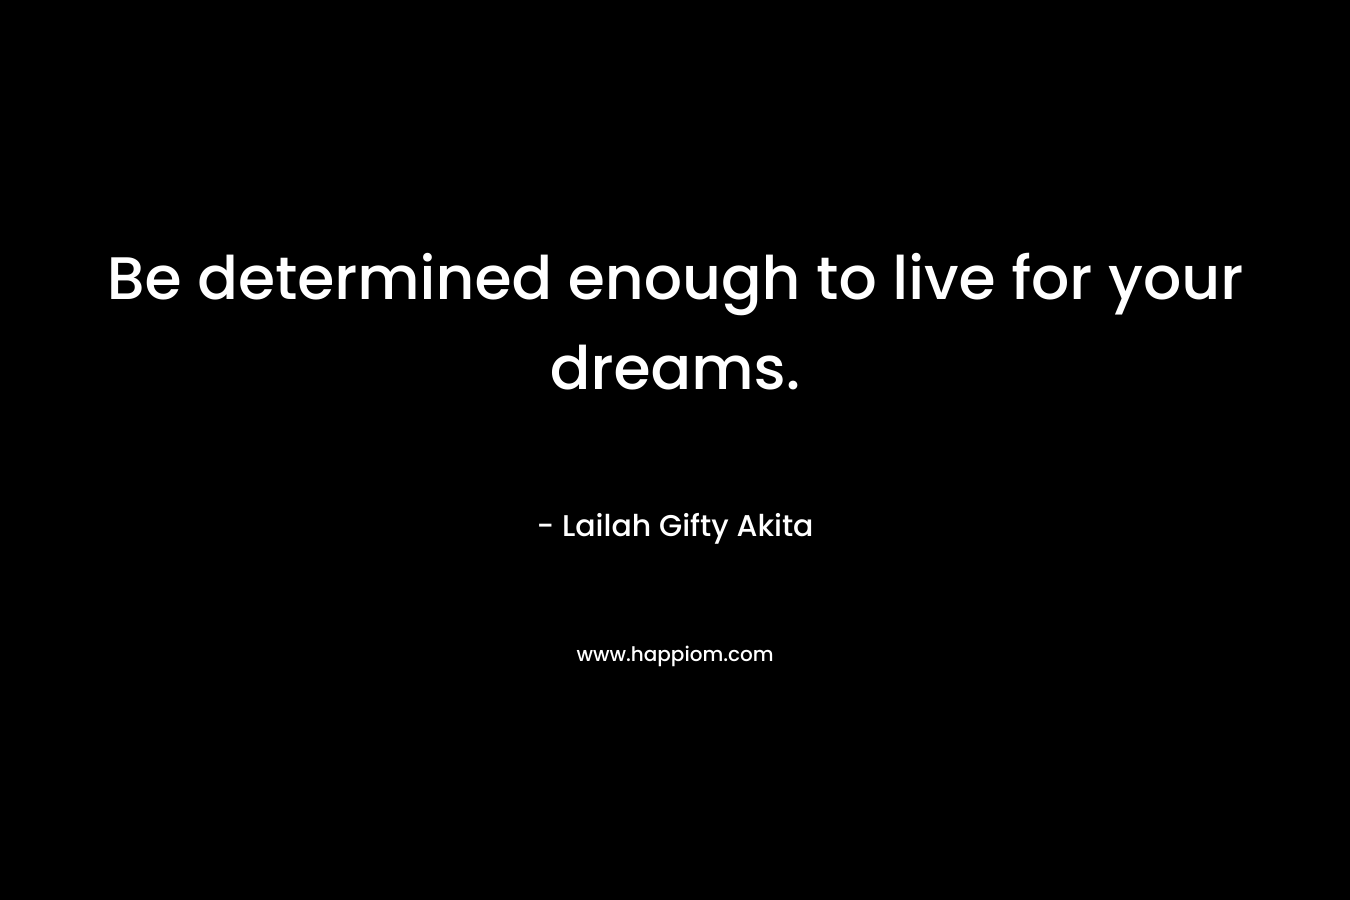 Be determined enough to live for your dreams.